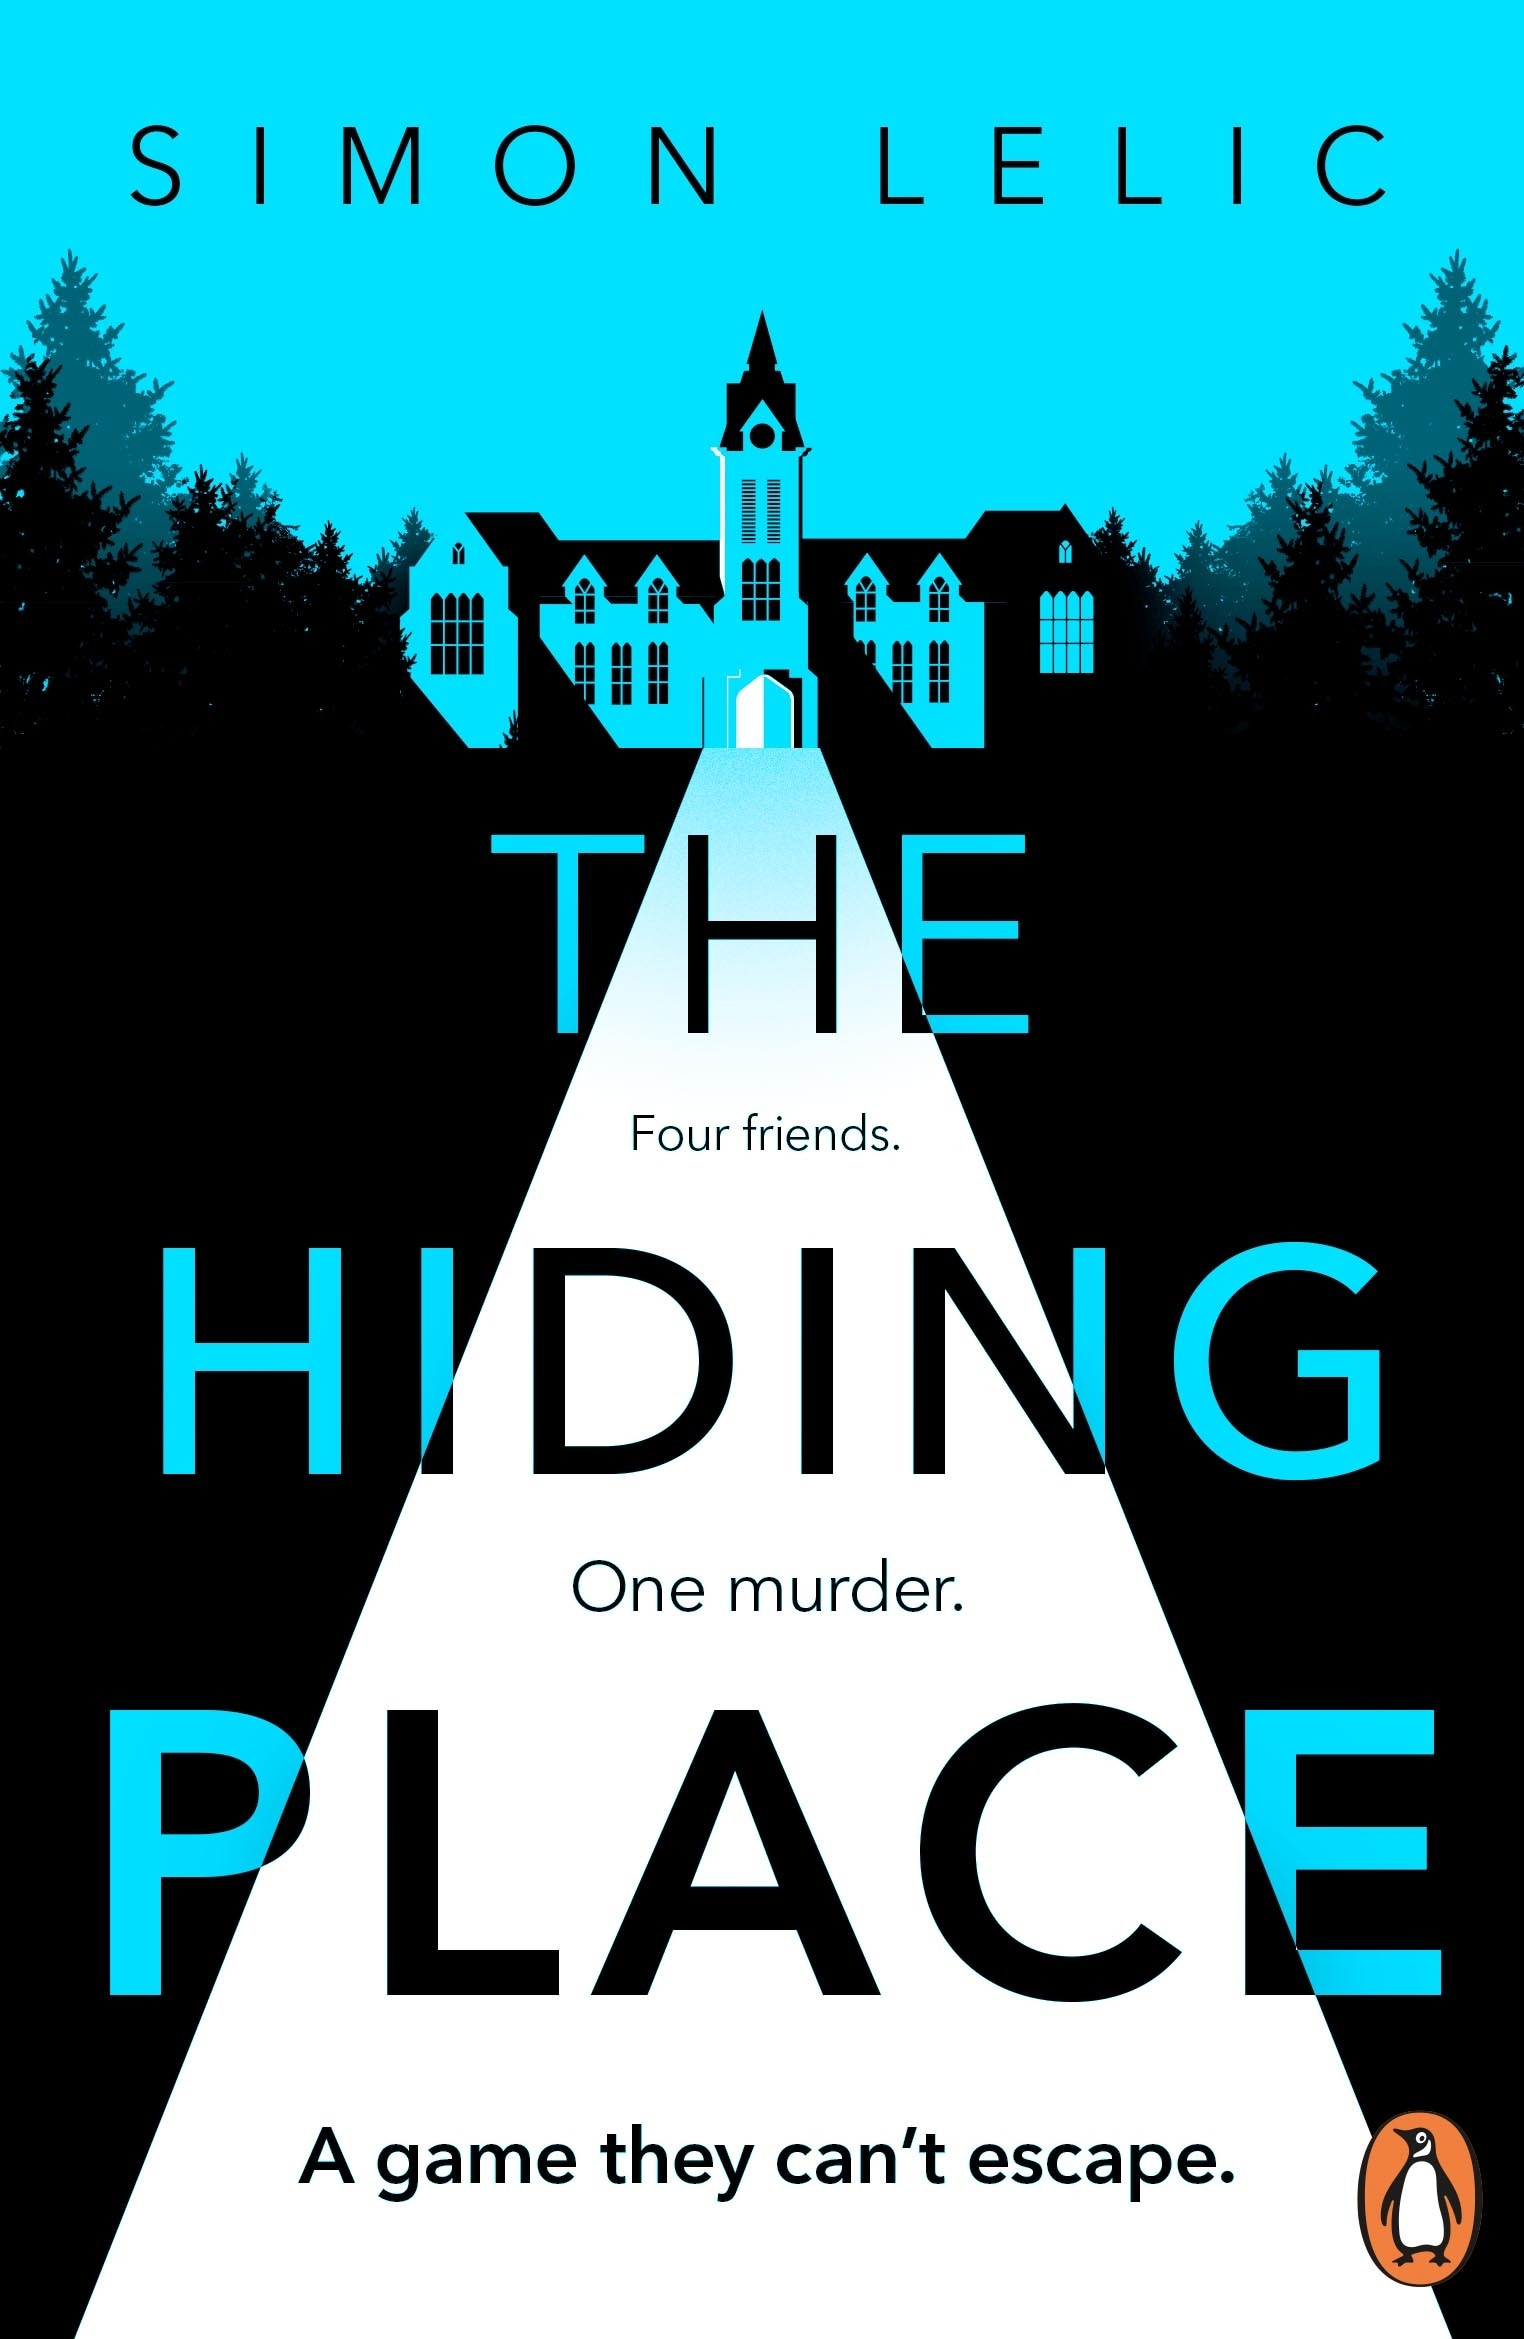 Book “The Hiding Place” by Simon Lelic — May 5, 2022